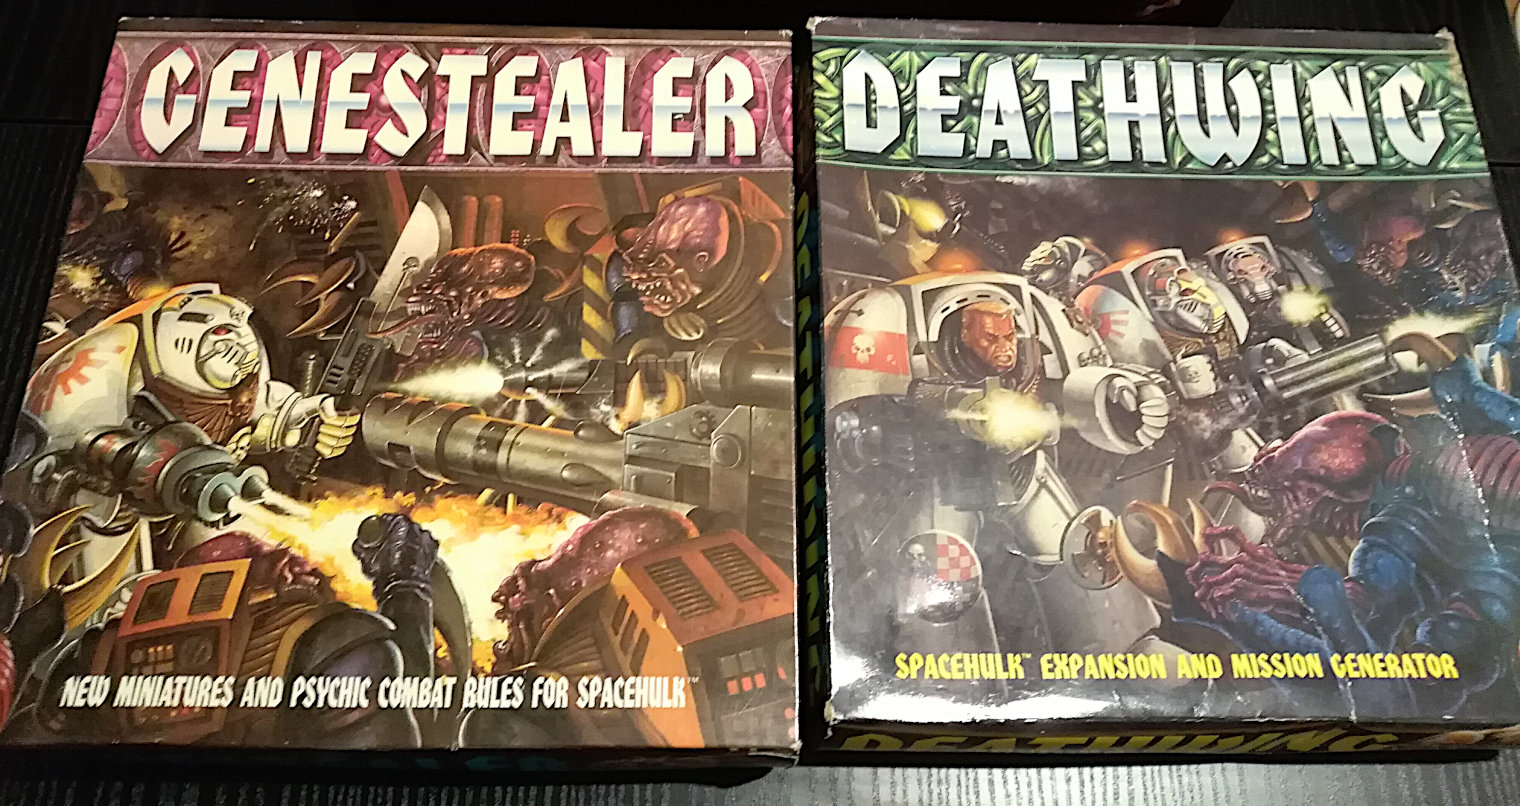 The expansions for Space Hulk